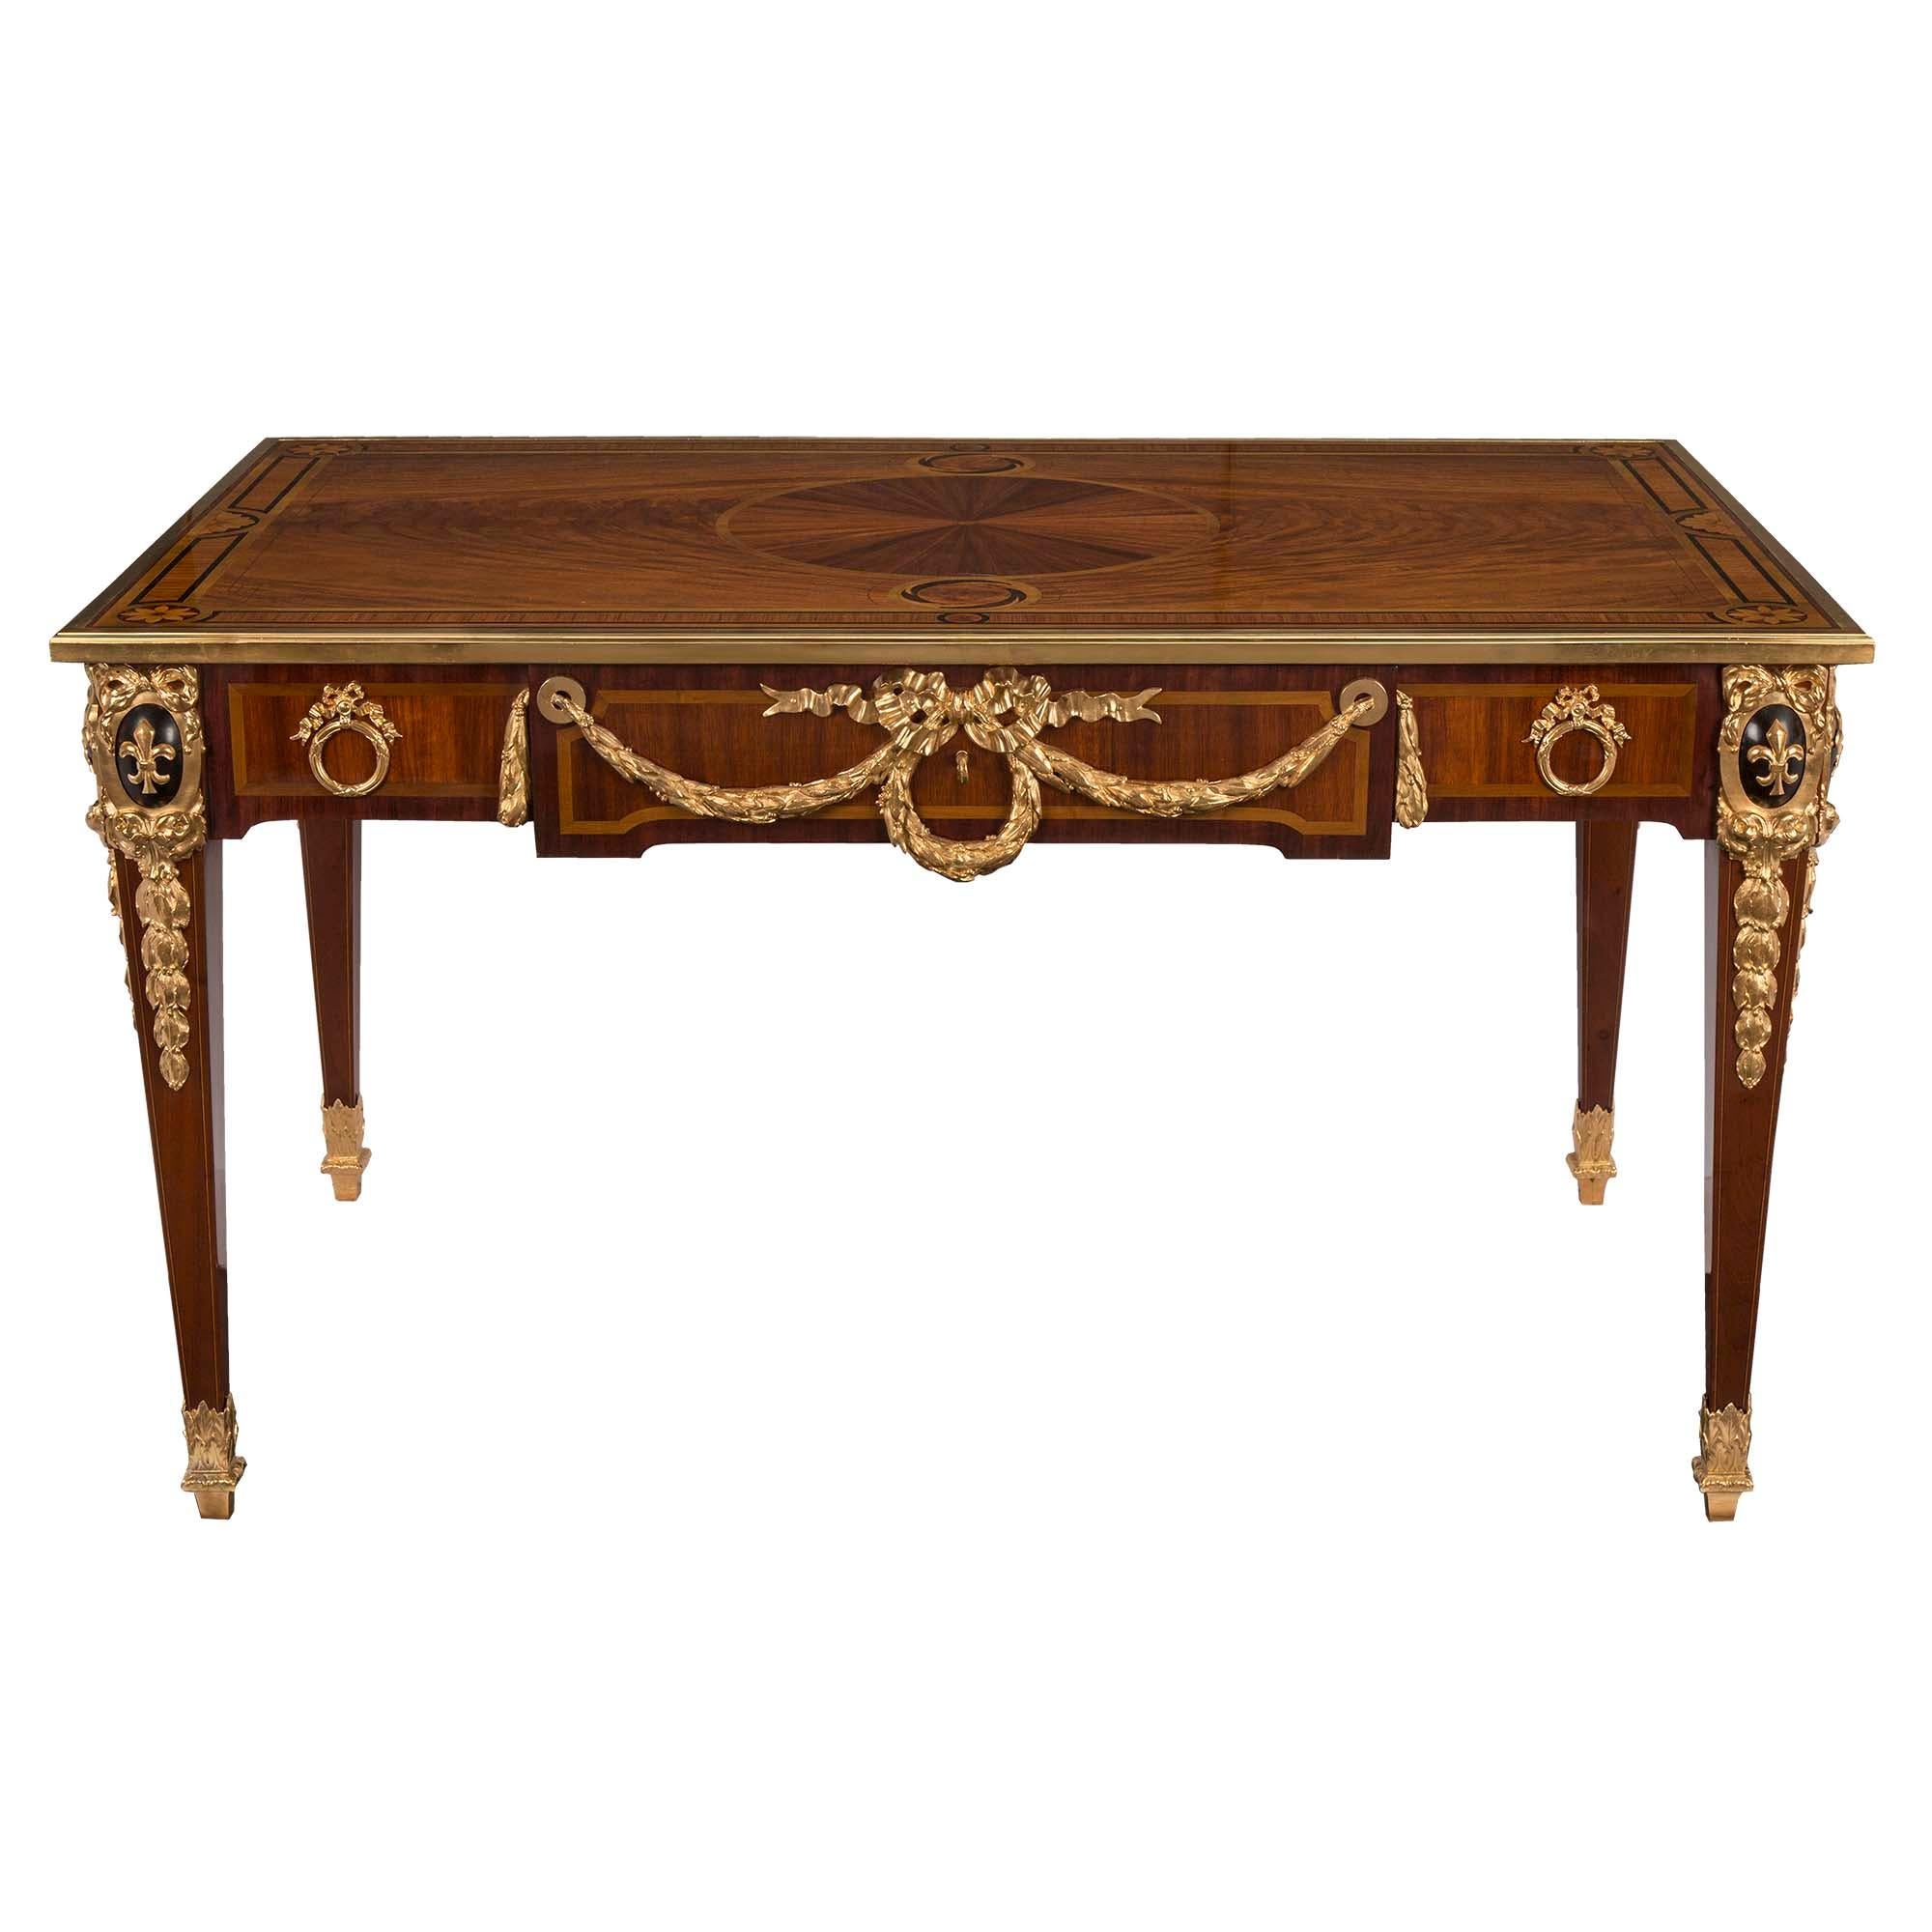 A very handsome and impressive French 19th century Louis XVI style mahogany and ormolu inlaid Bureau Plat. The desk is raised on tapered legs with square ormolu topie feet and ormolu acanthus leaf sabots. The frieze has a kingwood inlay with